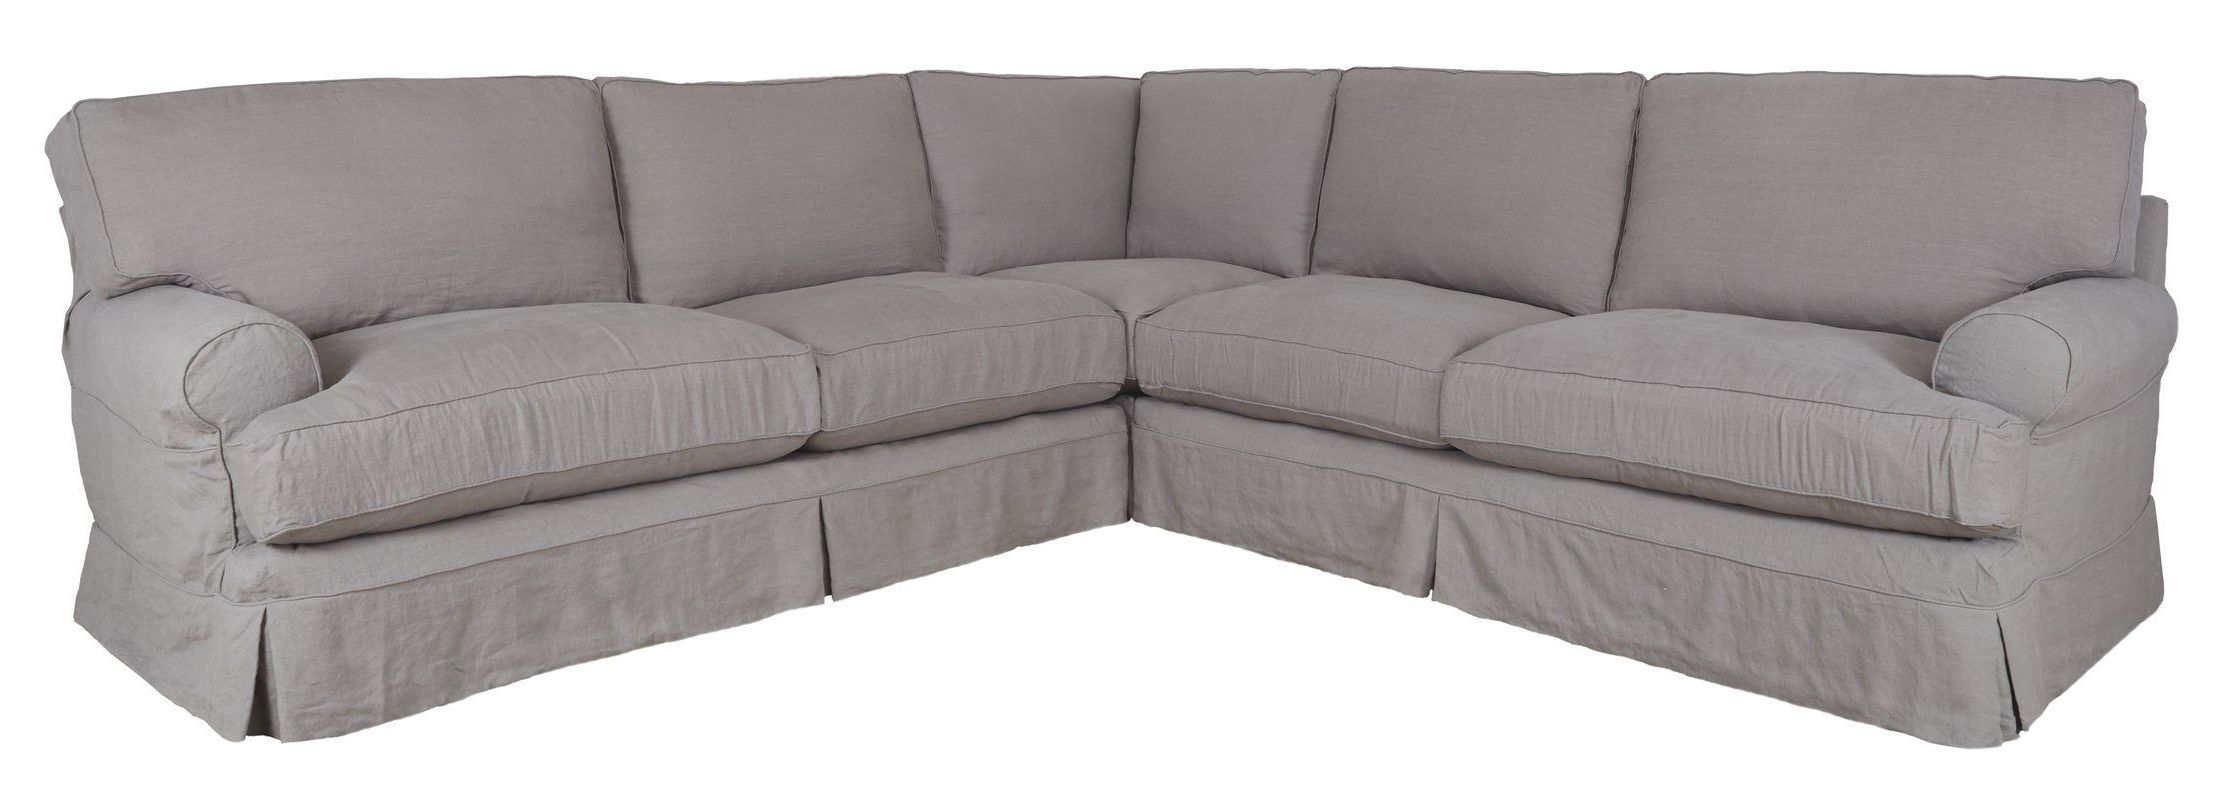 Pin On Megan And Colleen Bought A House!!! For Favorite Gneiss Modern Linen Sectional Sofas Slate Gray (View 4 of 25)